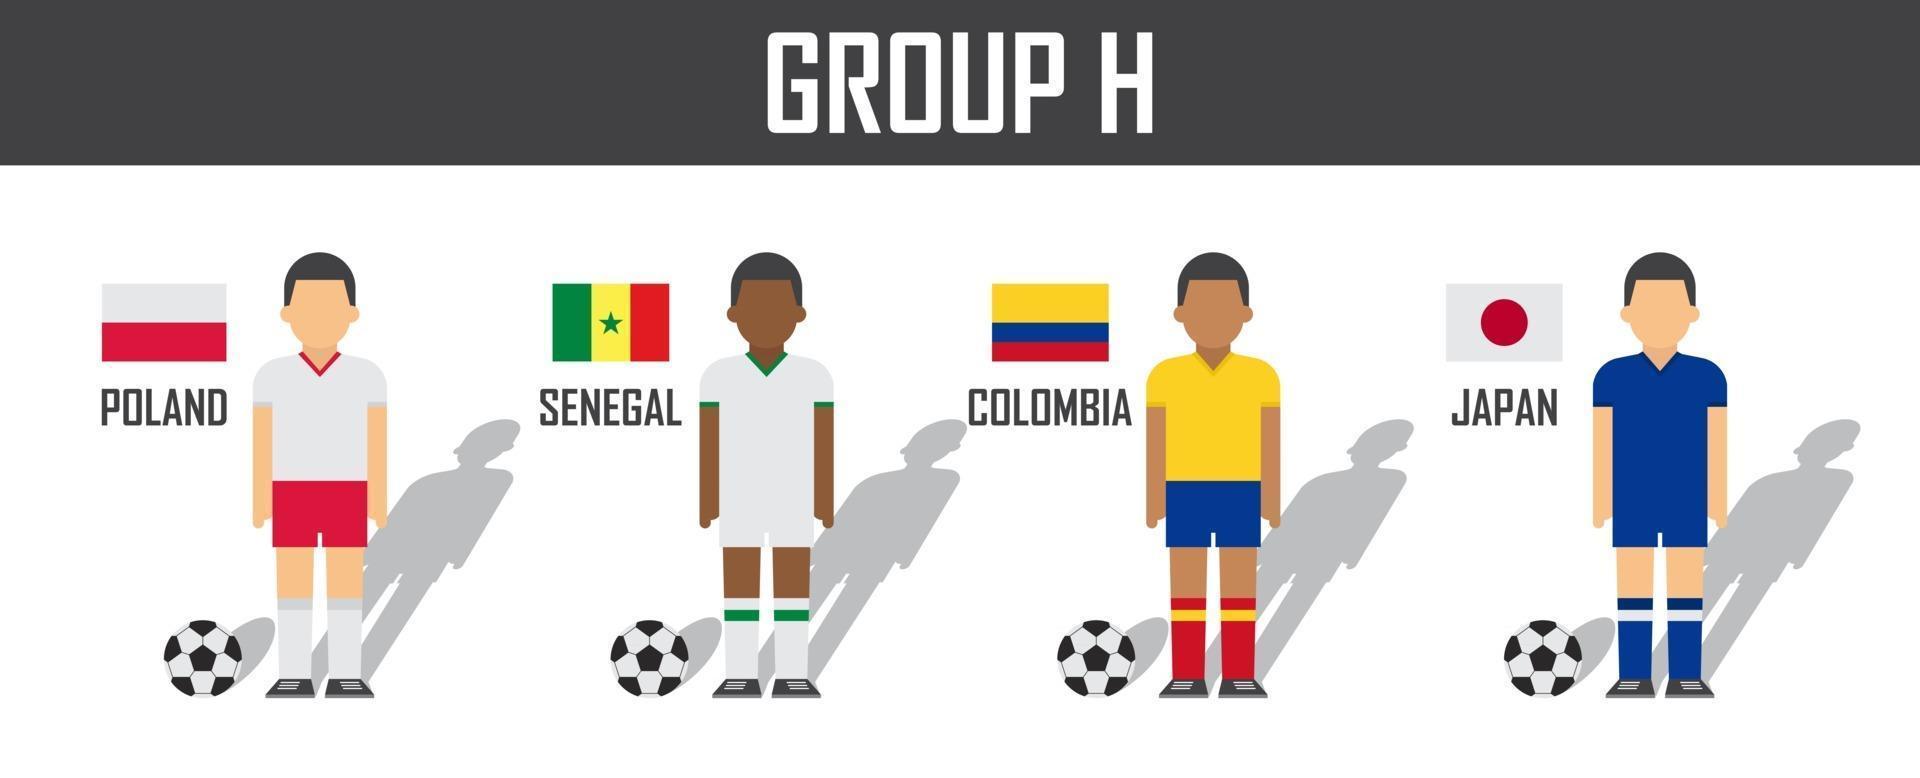 Soccer cup 2018 team group H . Football players with jersey uniform and national flags . Vector for international world championship tournament .